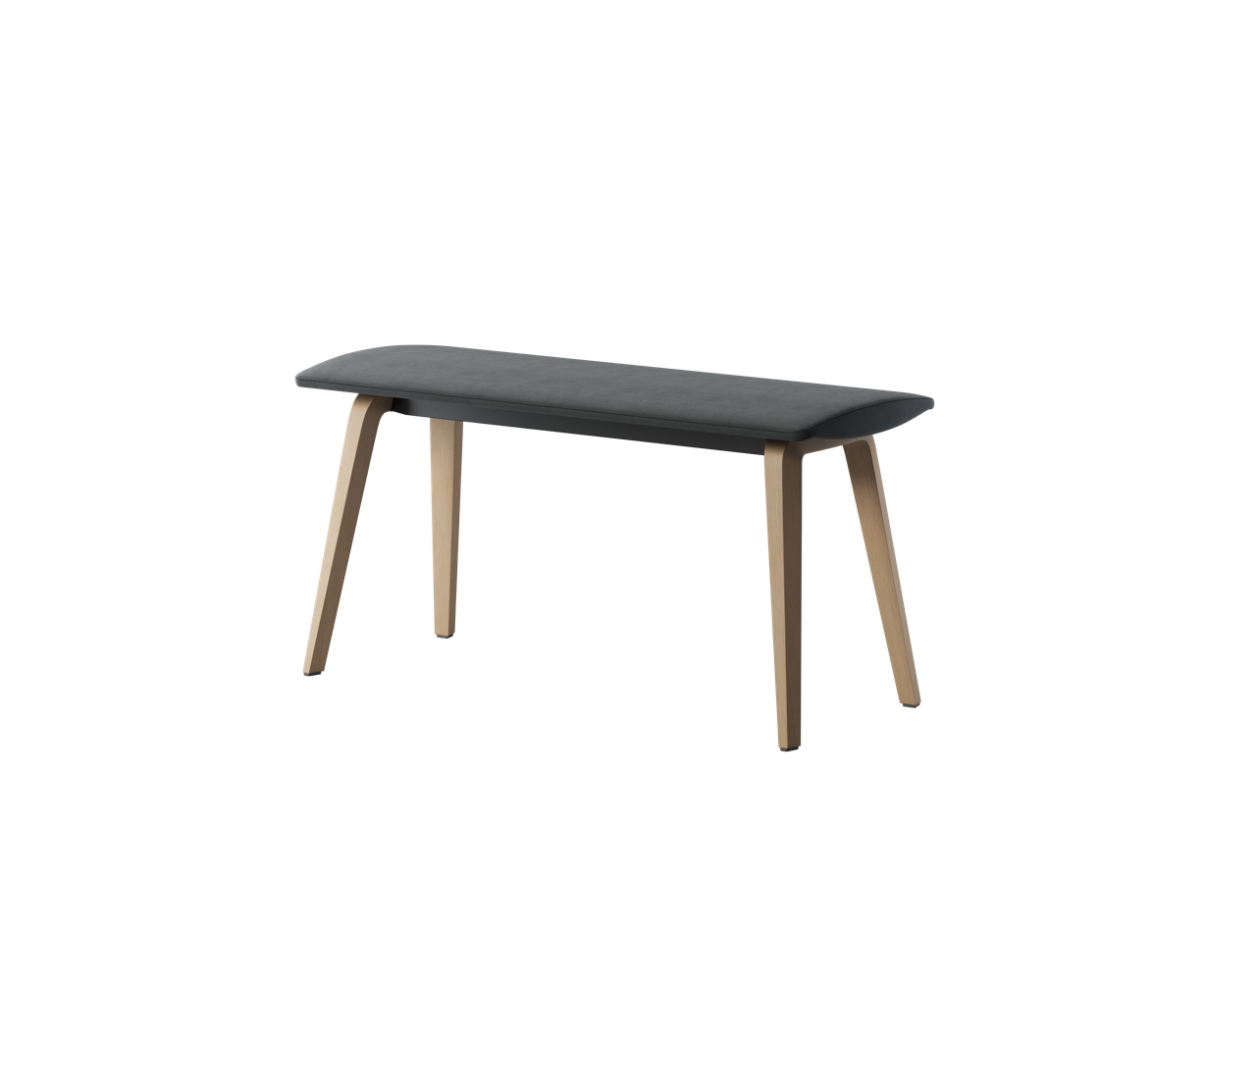 OCEE&FOUR – Stools & Benches – Share Bench – Packshot Image(58) Large